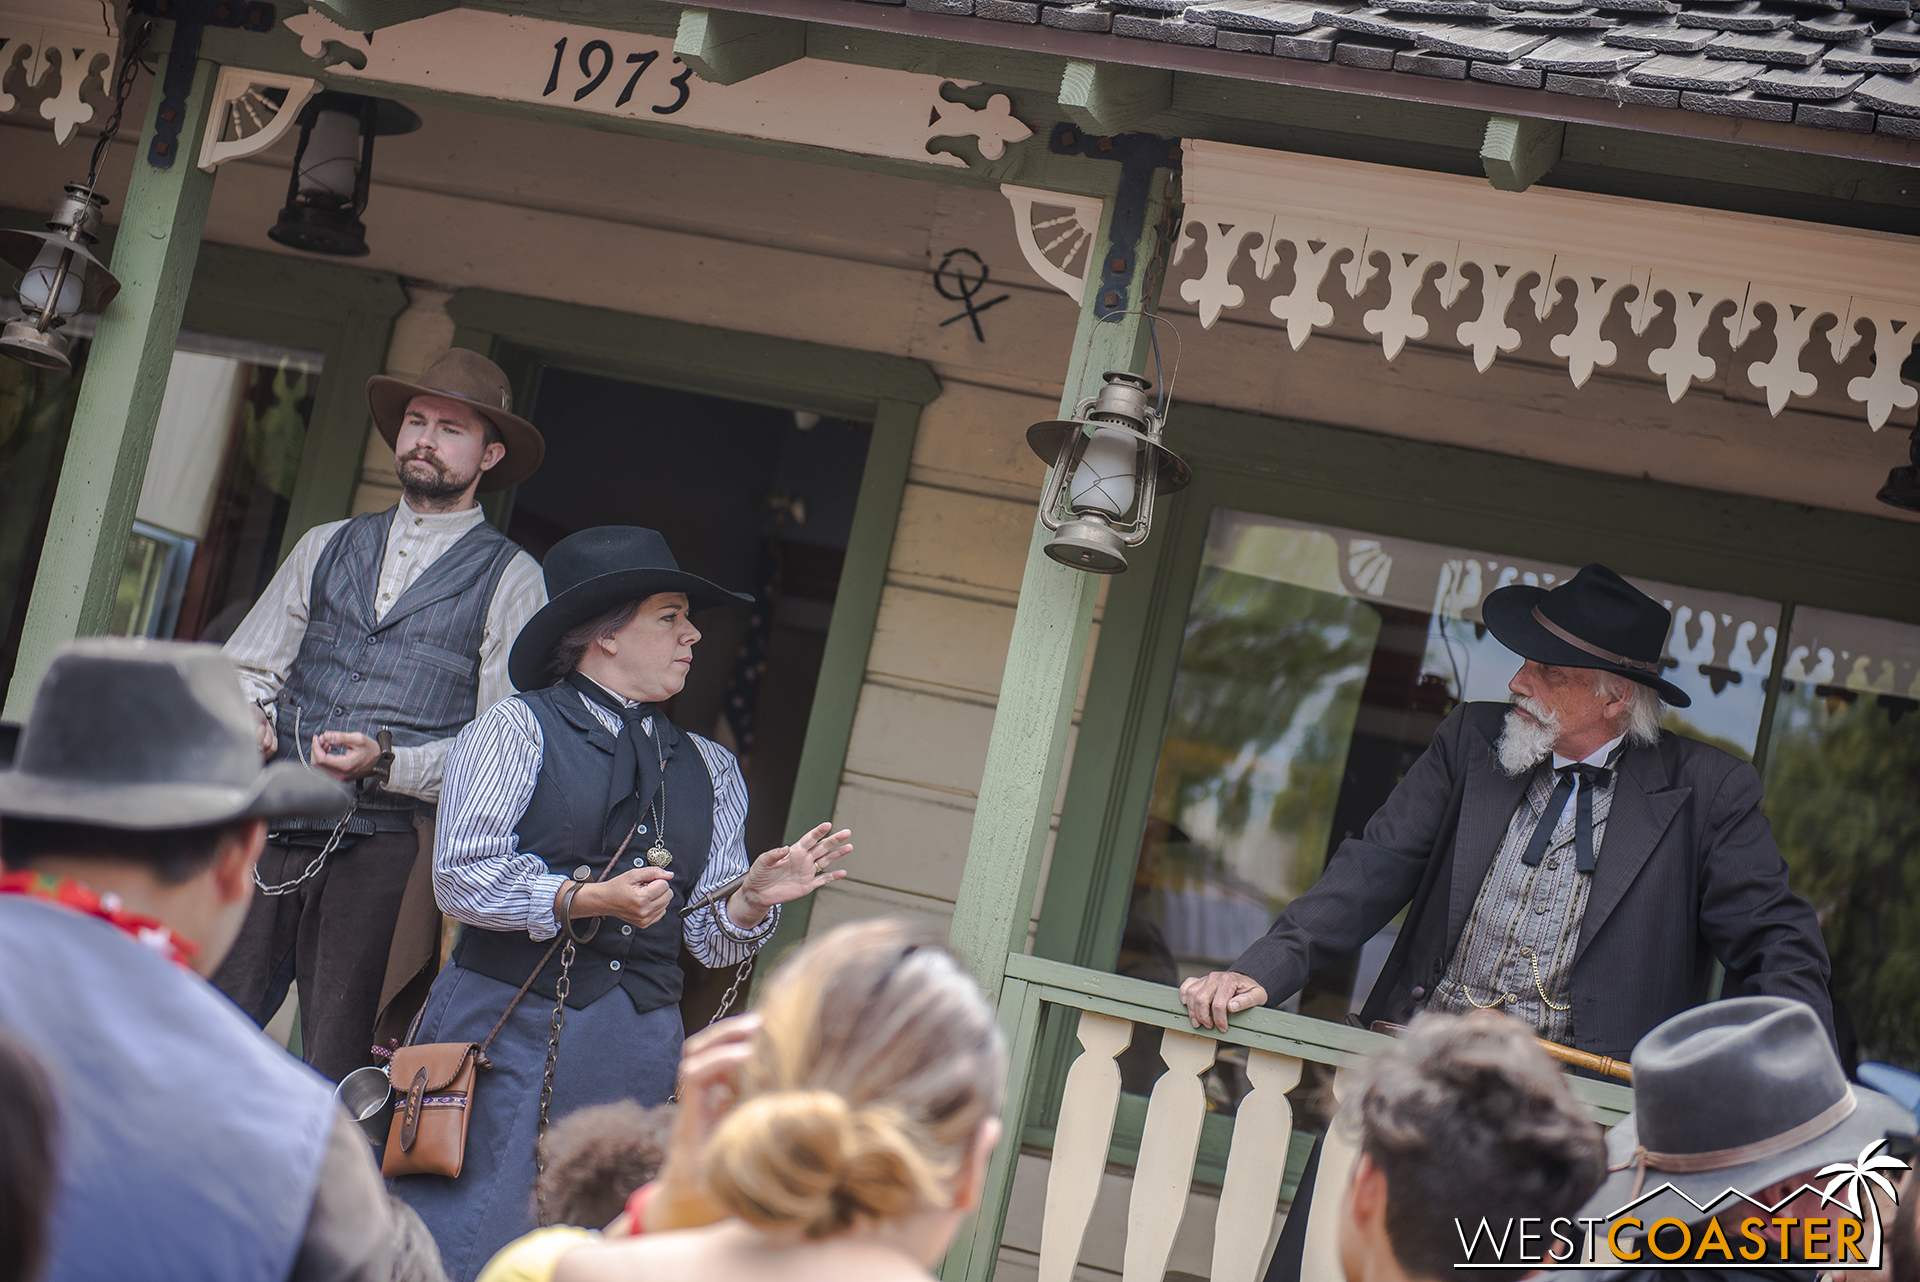  In front of the townspeople, Phyllis Mayfield is given the chance to plead her case by Judge Roy Bean, who also reveals his romantic past with Ma Mayfield, much to everyone’s shock. 